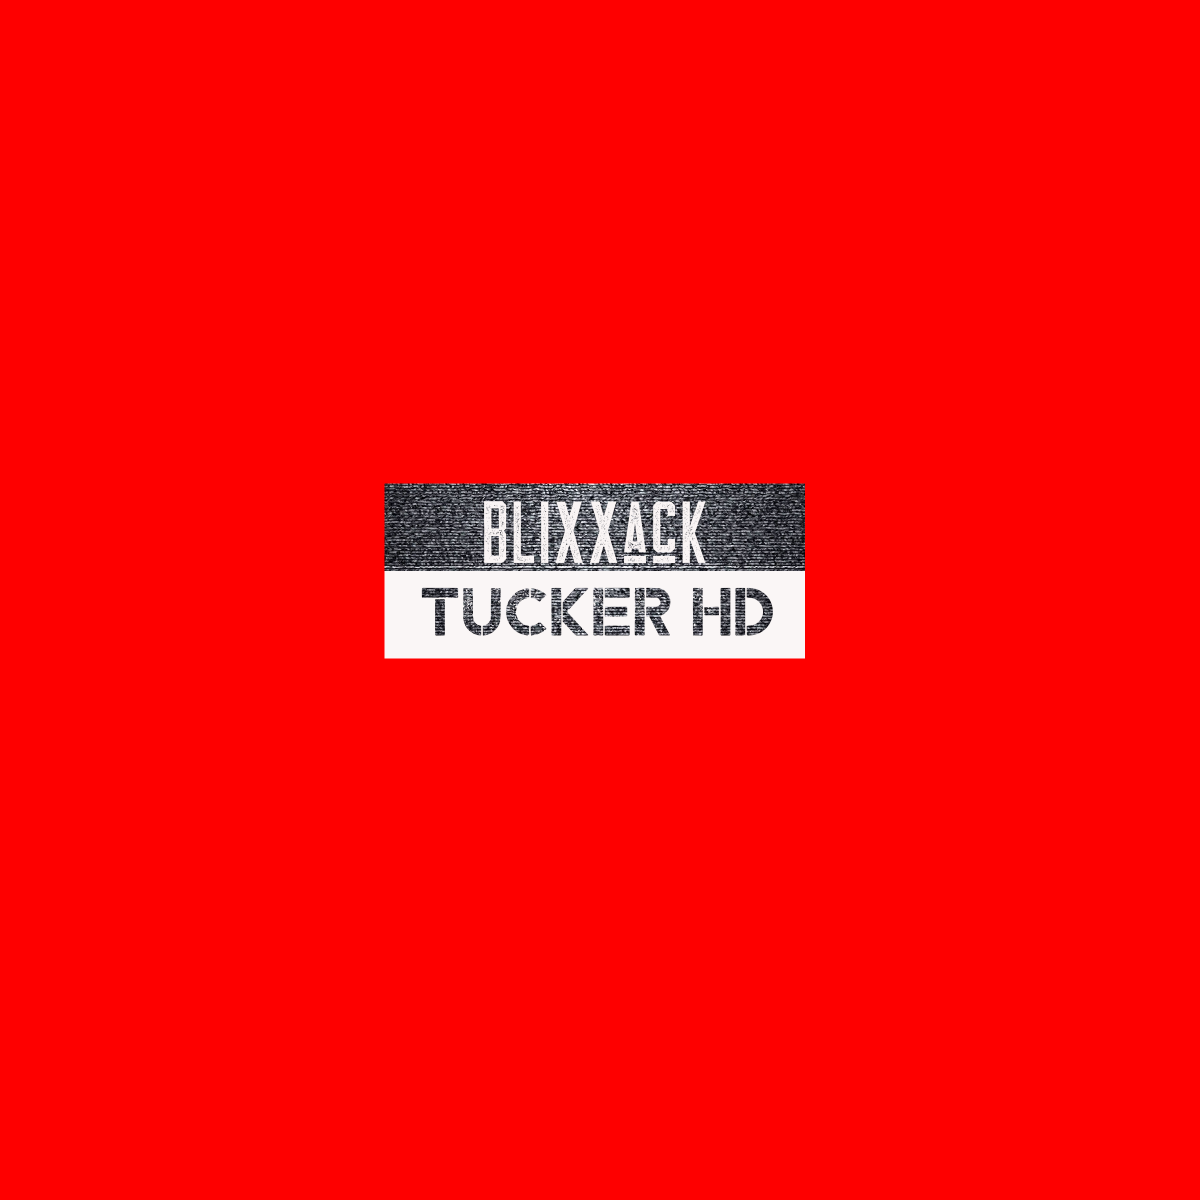 If you are in a toxic relationship: Tucker HD and Blixxack have a new song “Addiction” – Listen